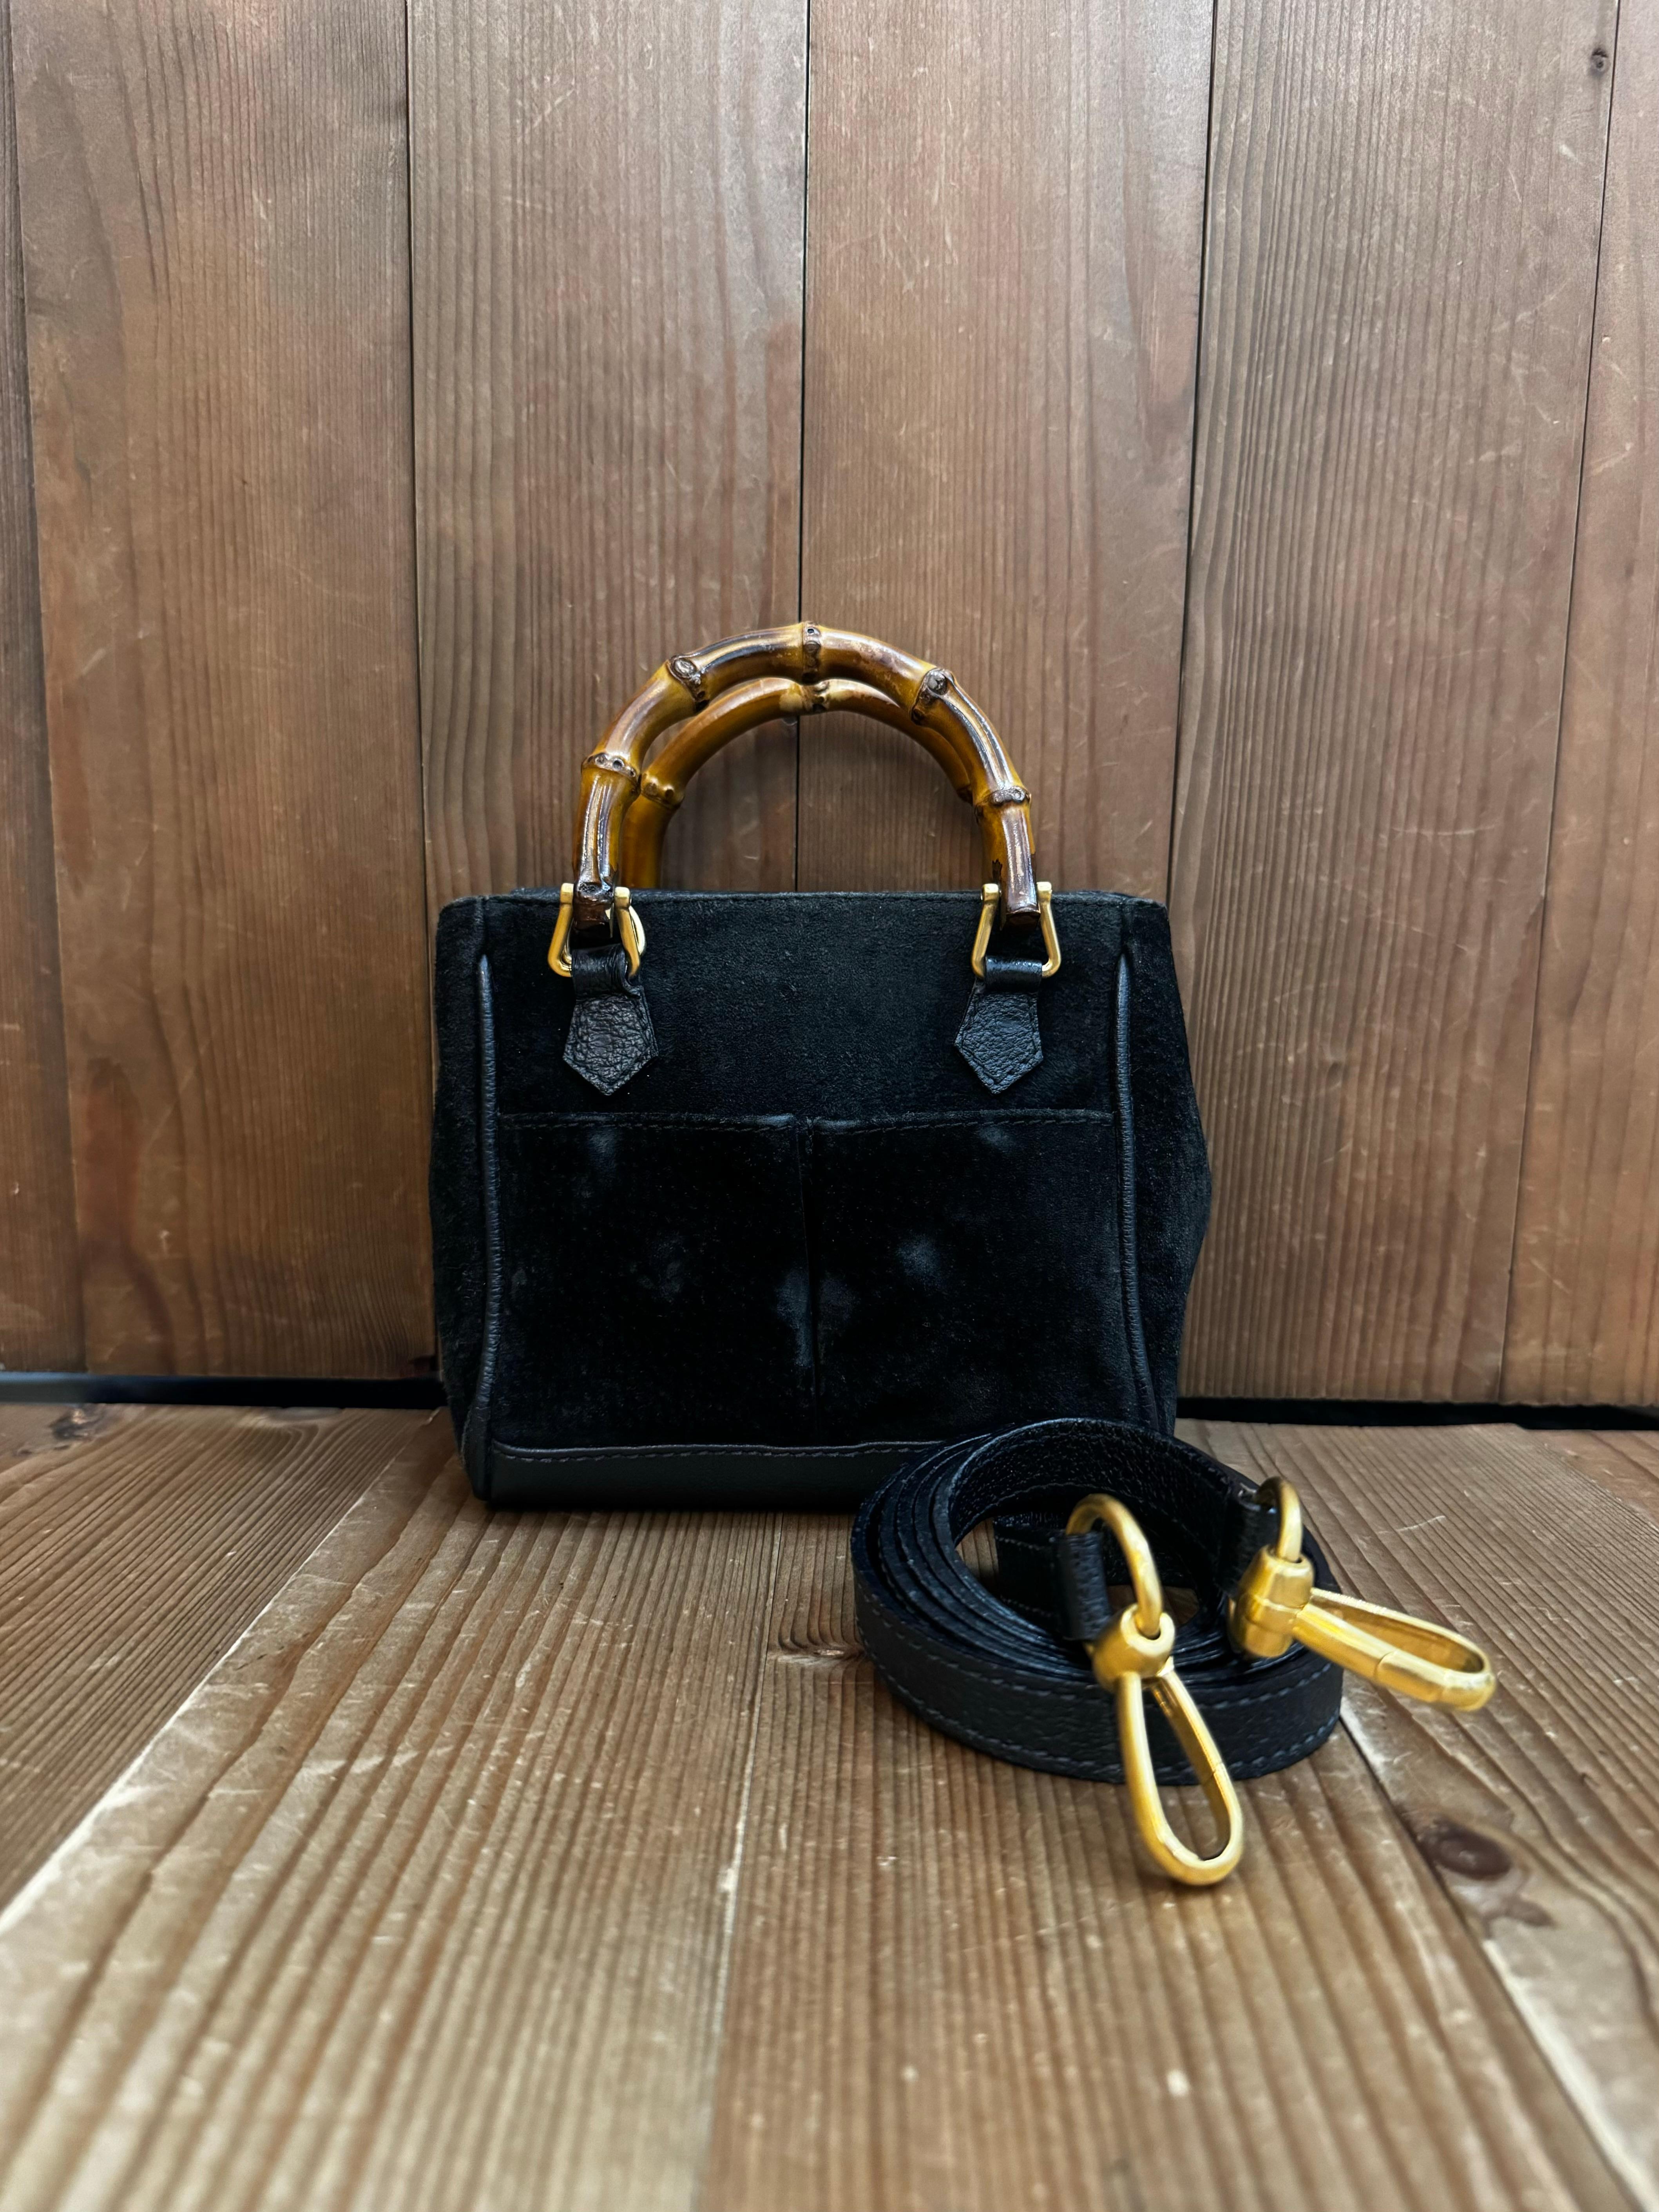 This vintage GUCCI mini 2-way bamboo crossbody bag is crafted of nubuck and pigskins leather in black featuring matt gold toned hardware and mini bamboo handles. The front of this bag features two open pockets lined with diamanté jacquard. Top